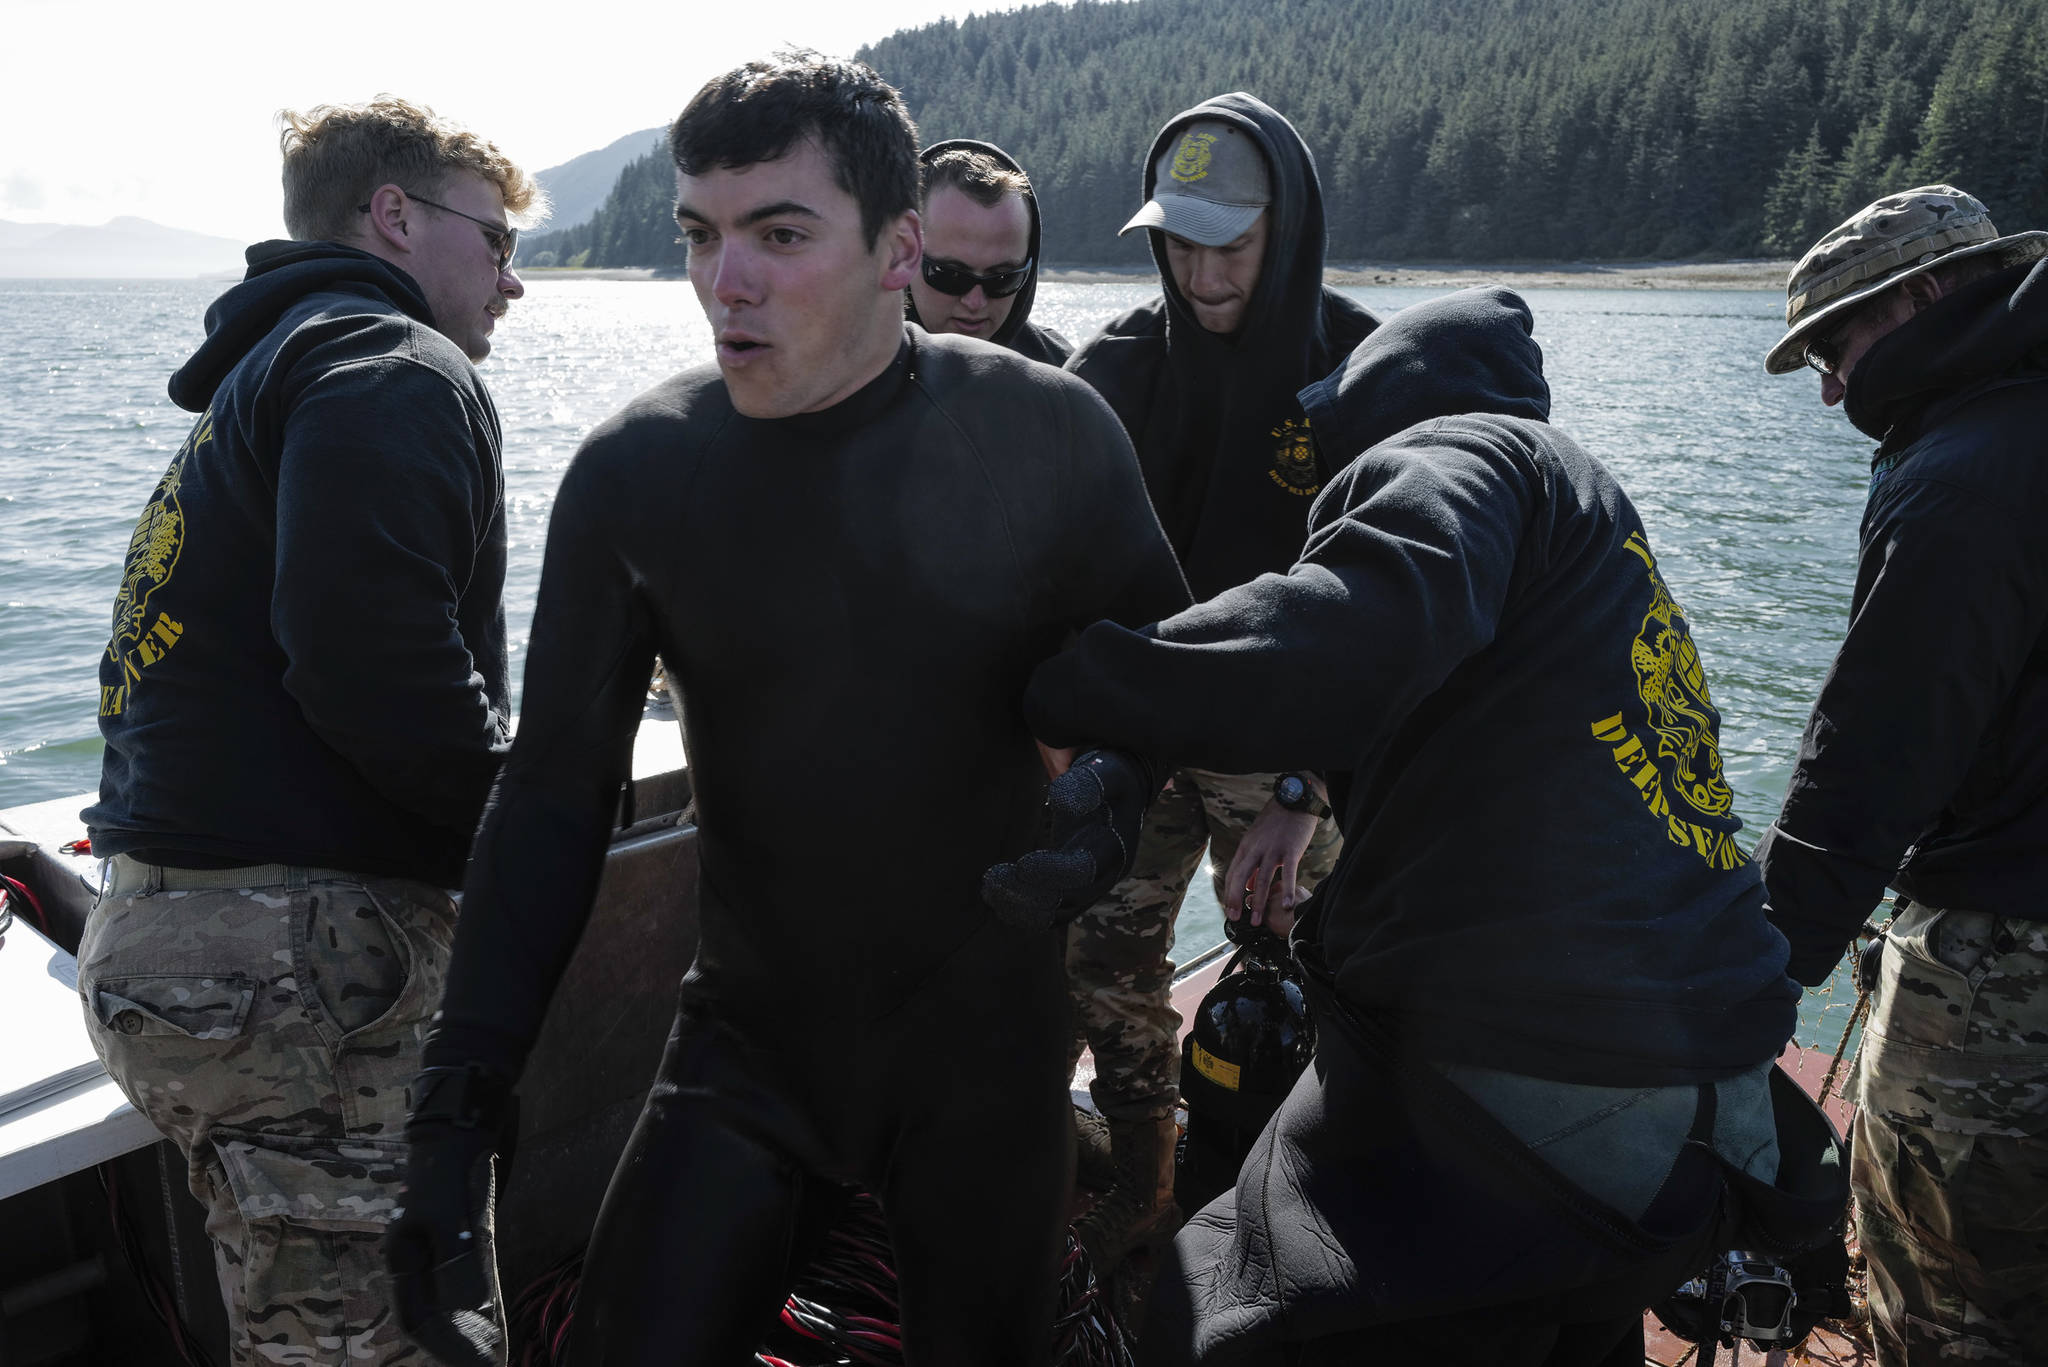 Spc. James Lewis, center, is helped out of his diving gear by teammates of the Army’s 74th Engineer Dive Detachment after retrieving a lost crab pots in 100 feet of water in Gastineau Channel for the Douglas Indian Association/NOAA Marine Debris Project on Thursday, Sept. 5, 2019. The project aims to identify and remove derelict crab pots and their continued negative impact on wildlife and the environment. (Michael Penn | Juneau Empire)